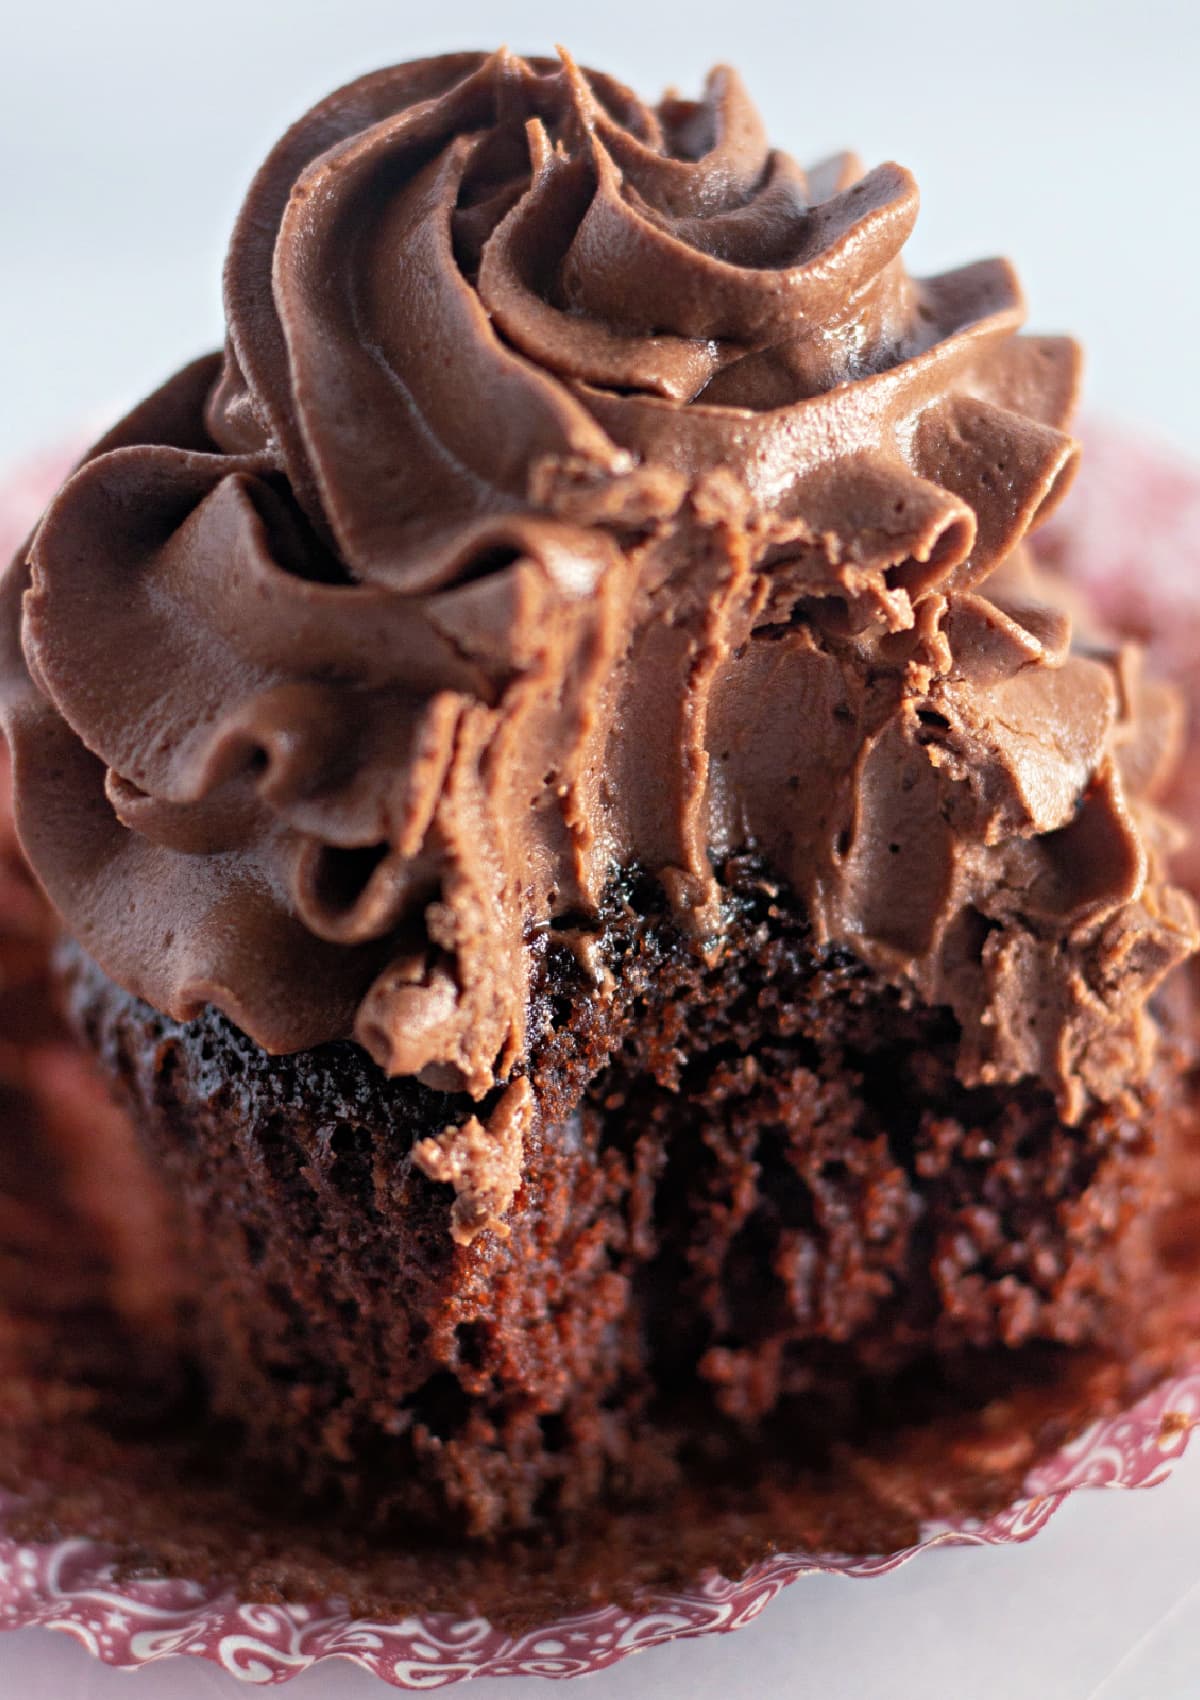 Frosted chocolate cupcakes with a bite taken out